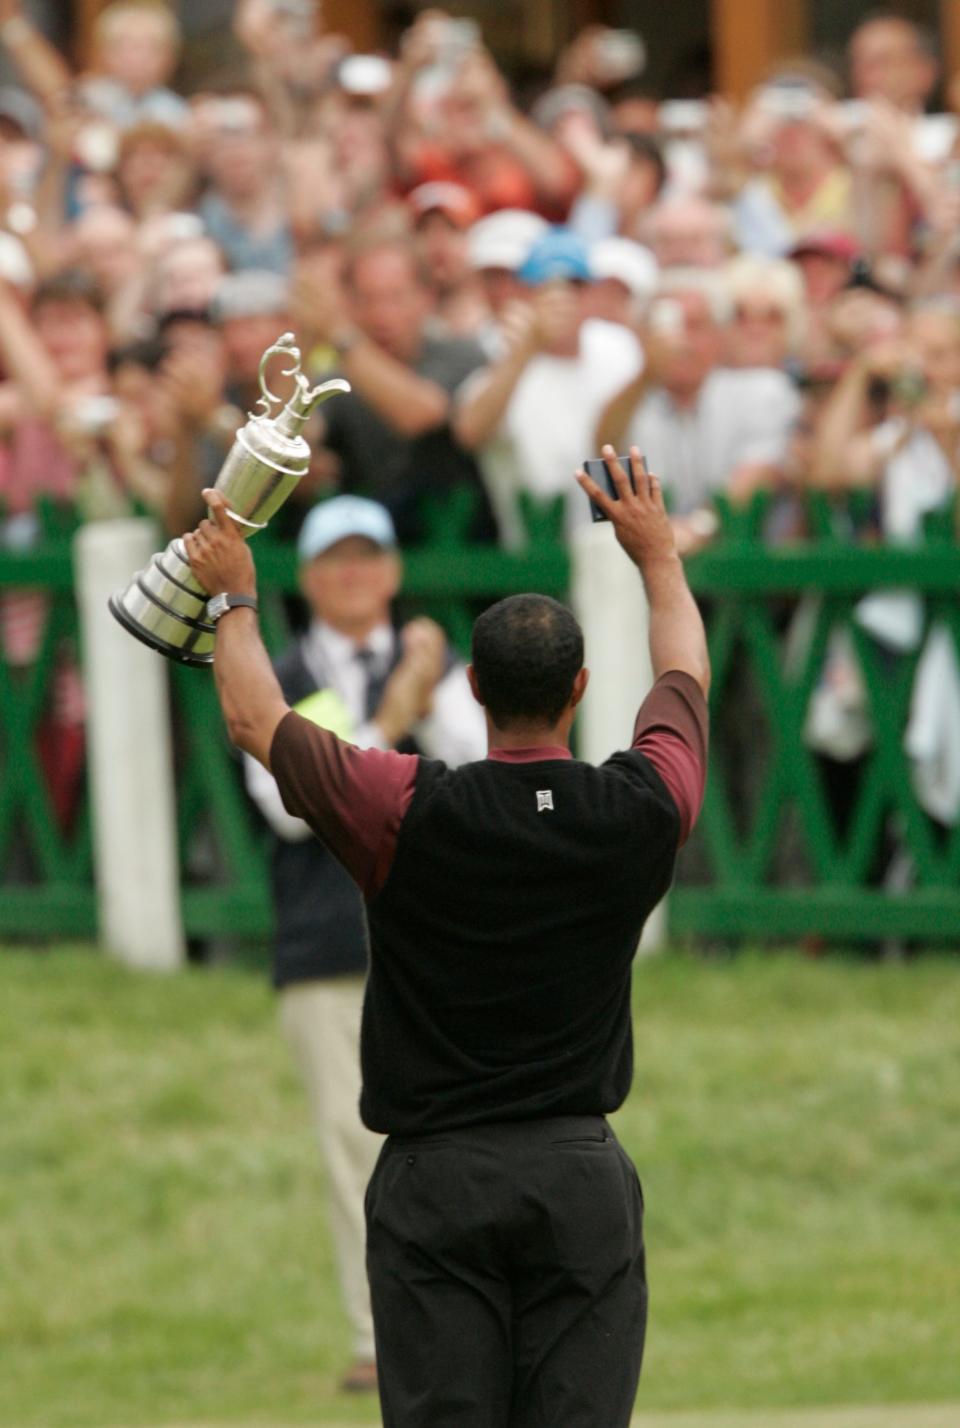 July 17, 2005 -- Tiger Woods waves to fans while holding up the Claret Jug after winning the British Open at St. Andrews.